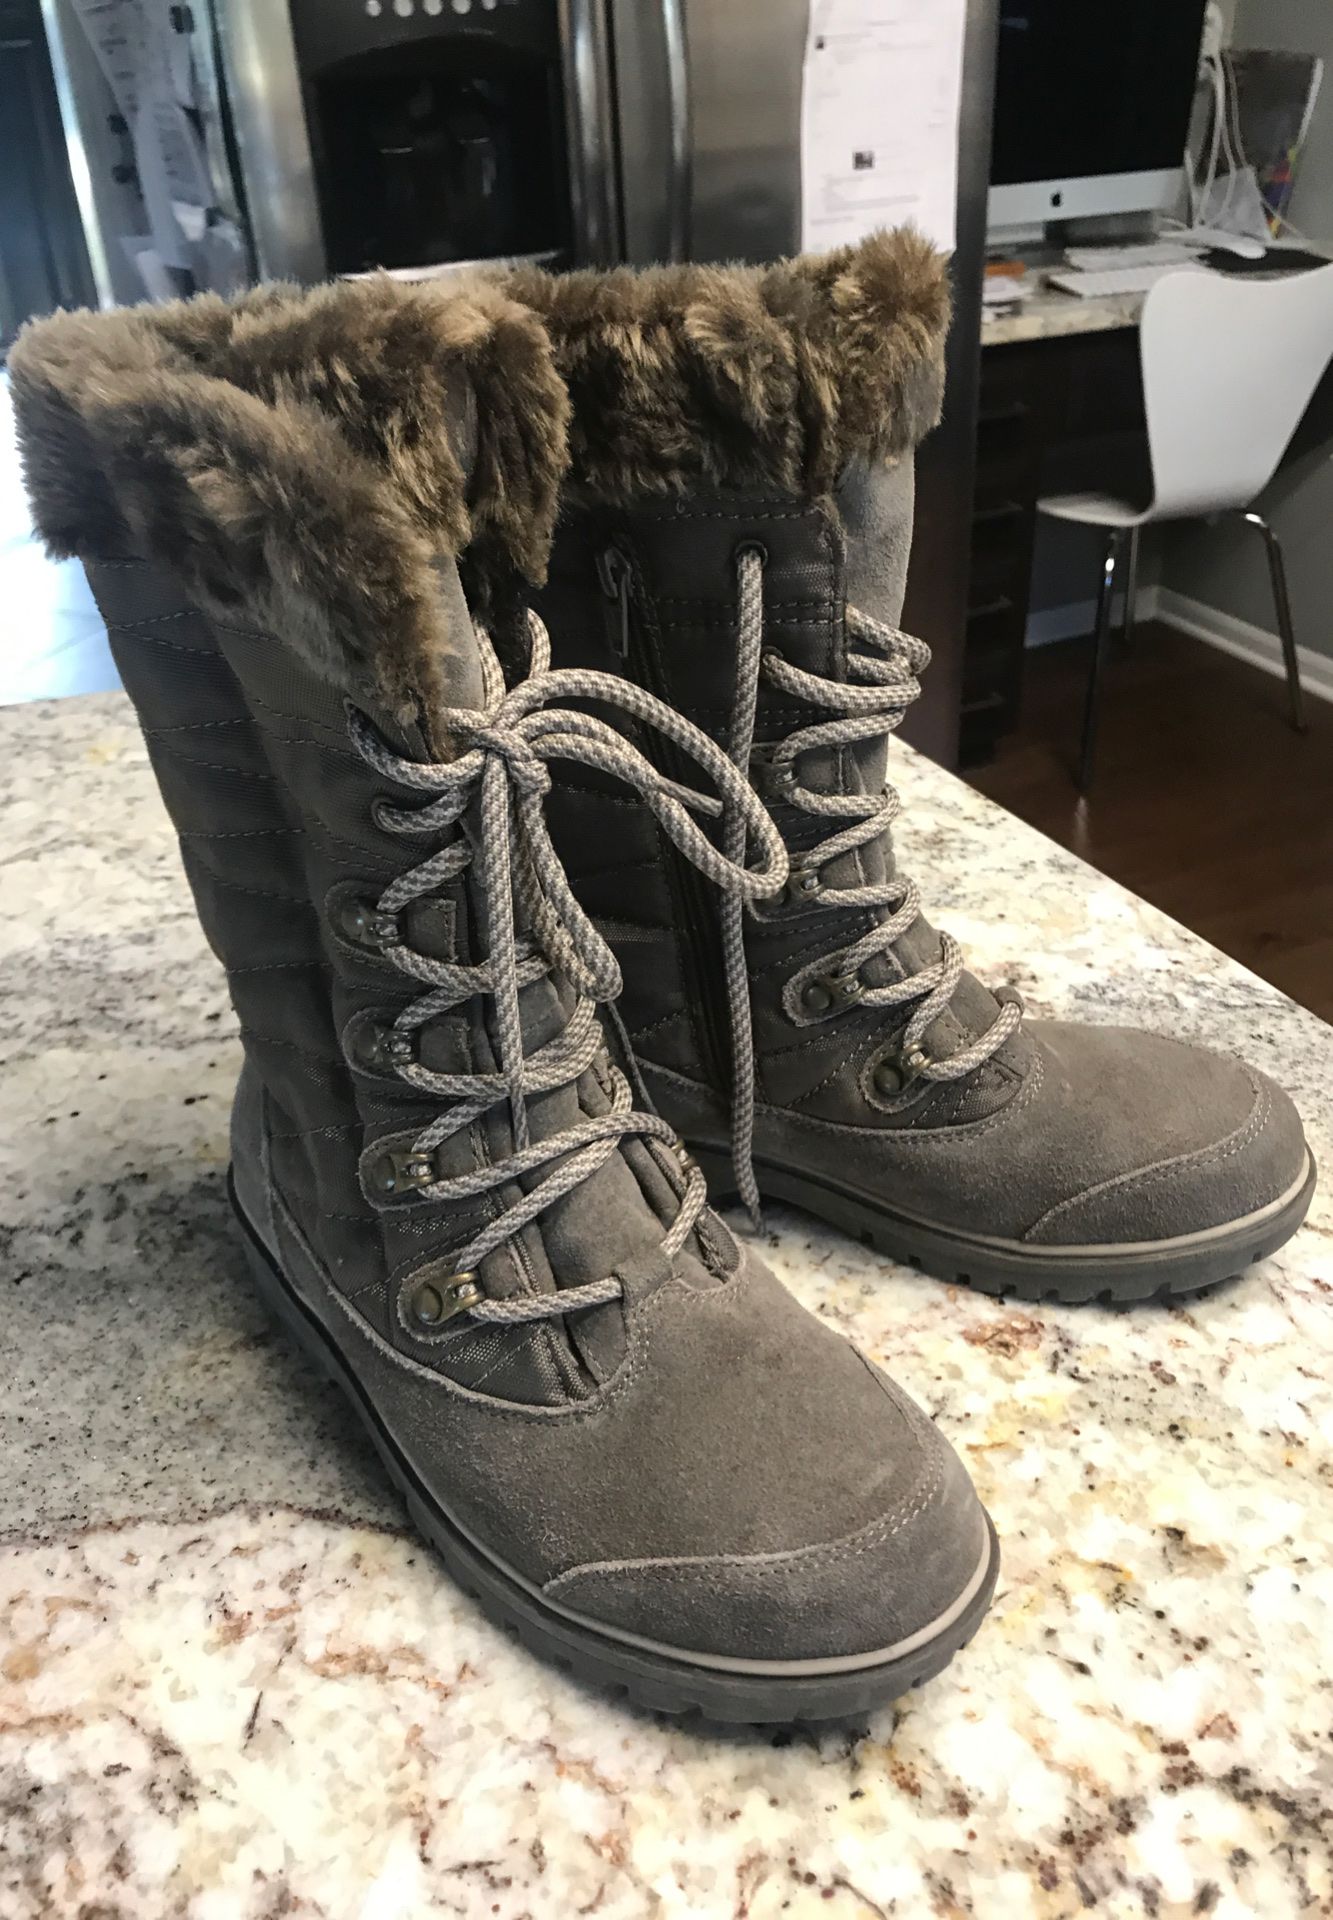 Girls/ women’s BARE TRAP boots size 6 1/2 worn only a couple times!